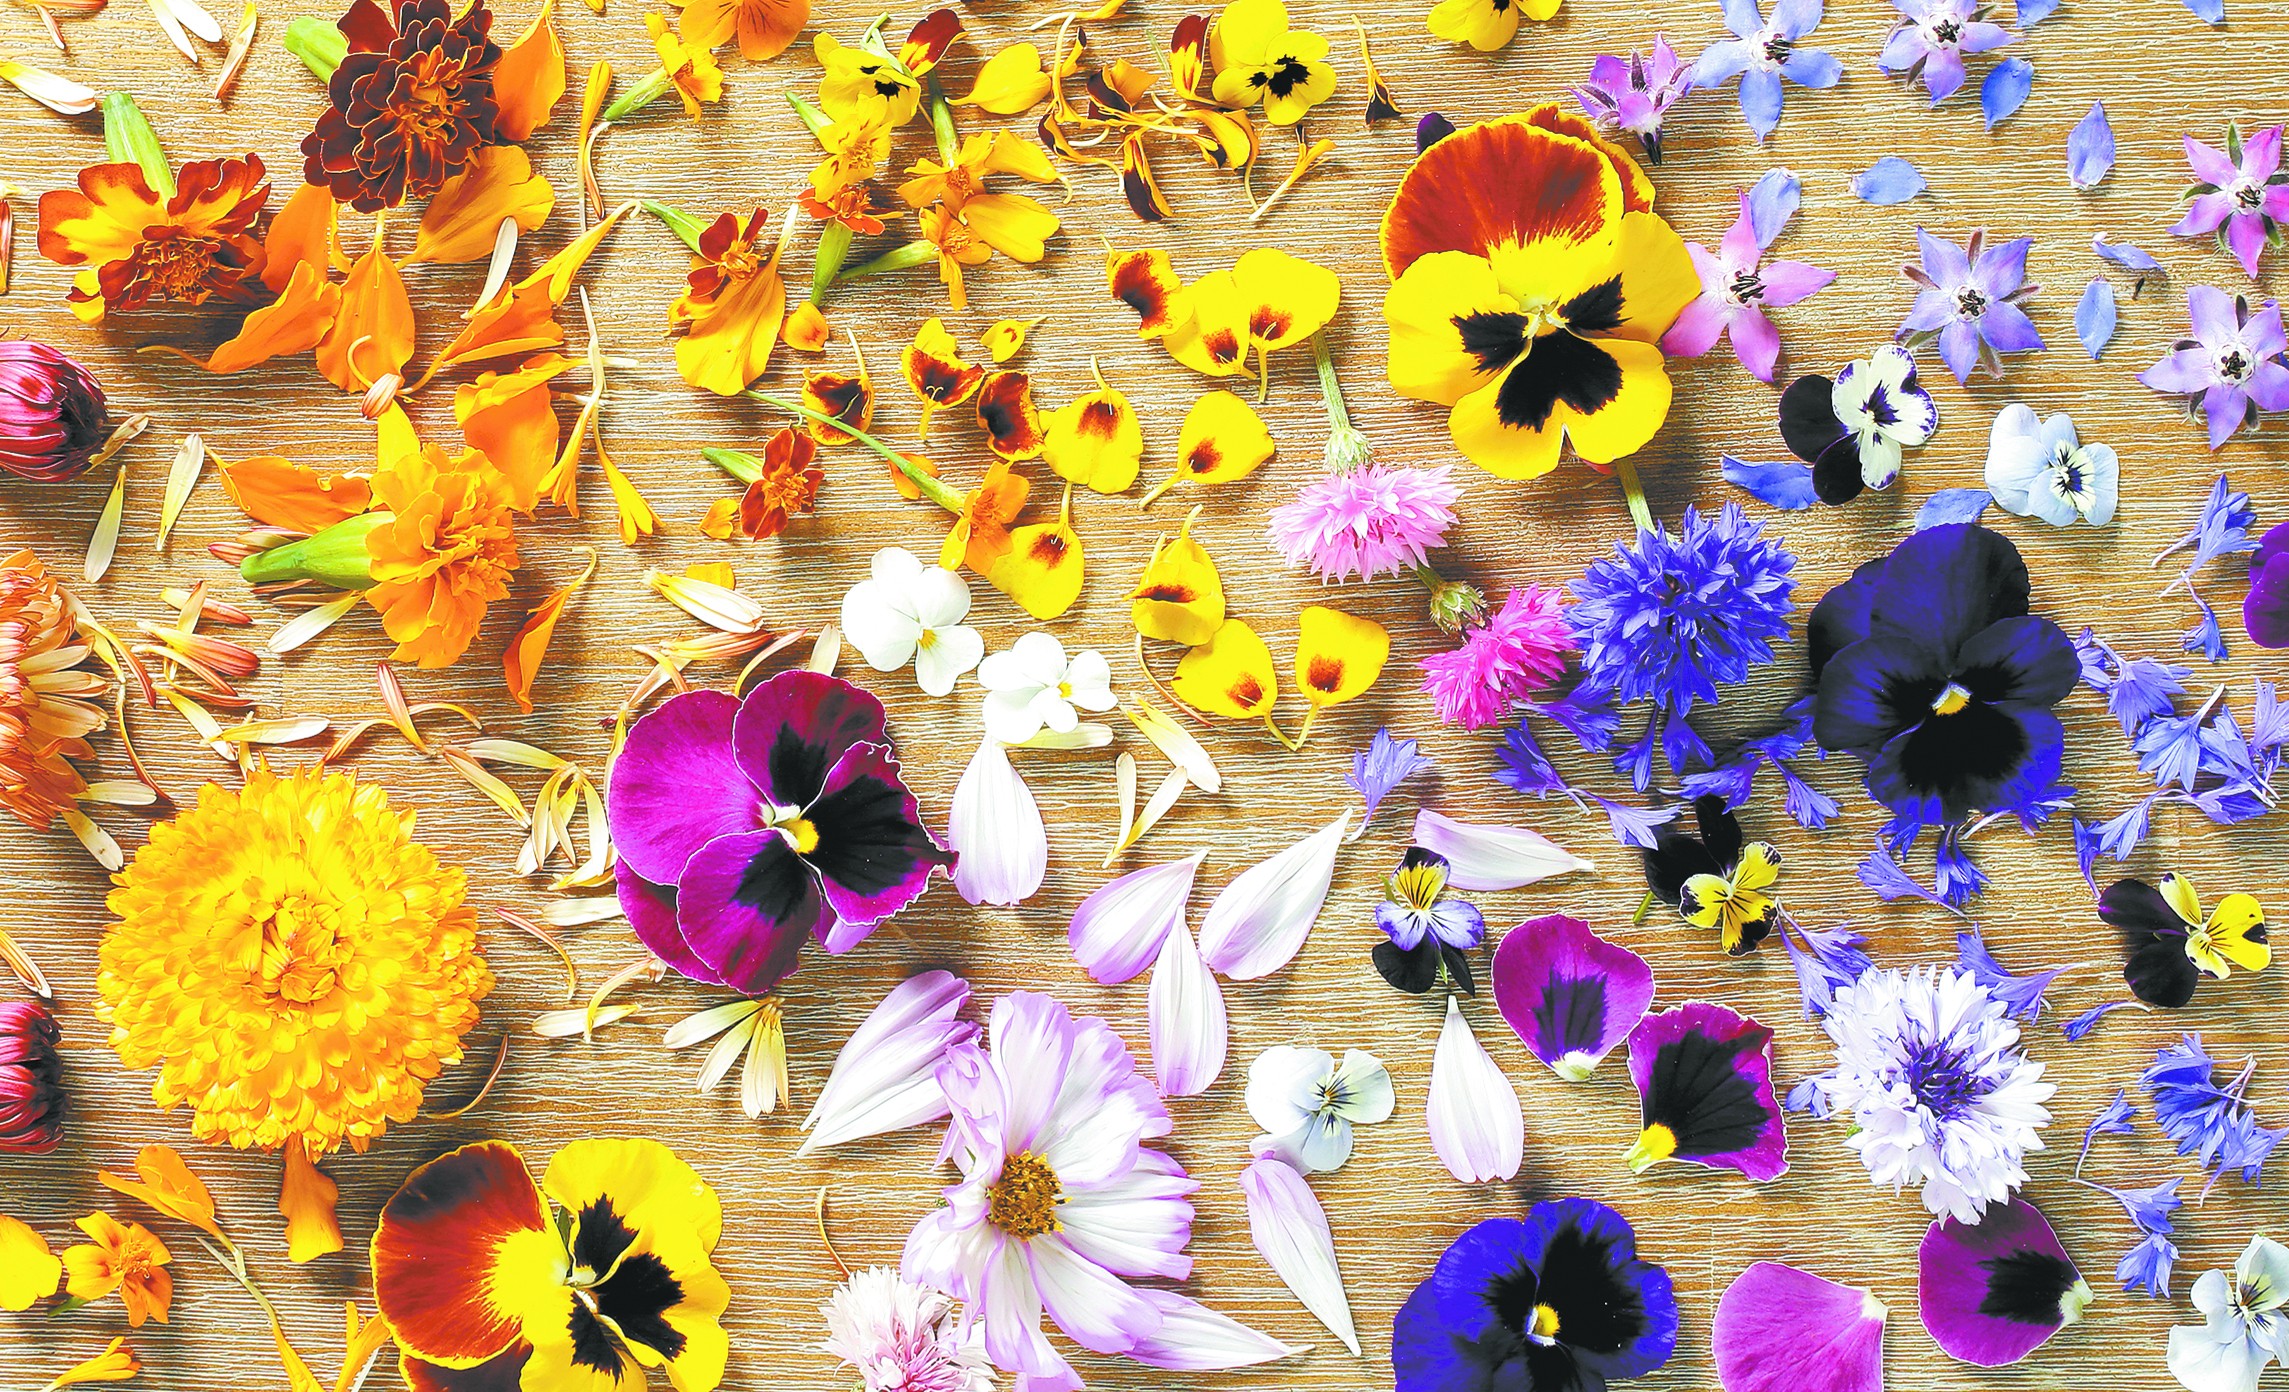 Edible flowers are a visual highlight on local menus, with pansy, marigold, calendula blossoms and more